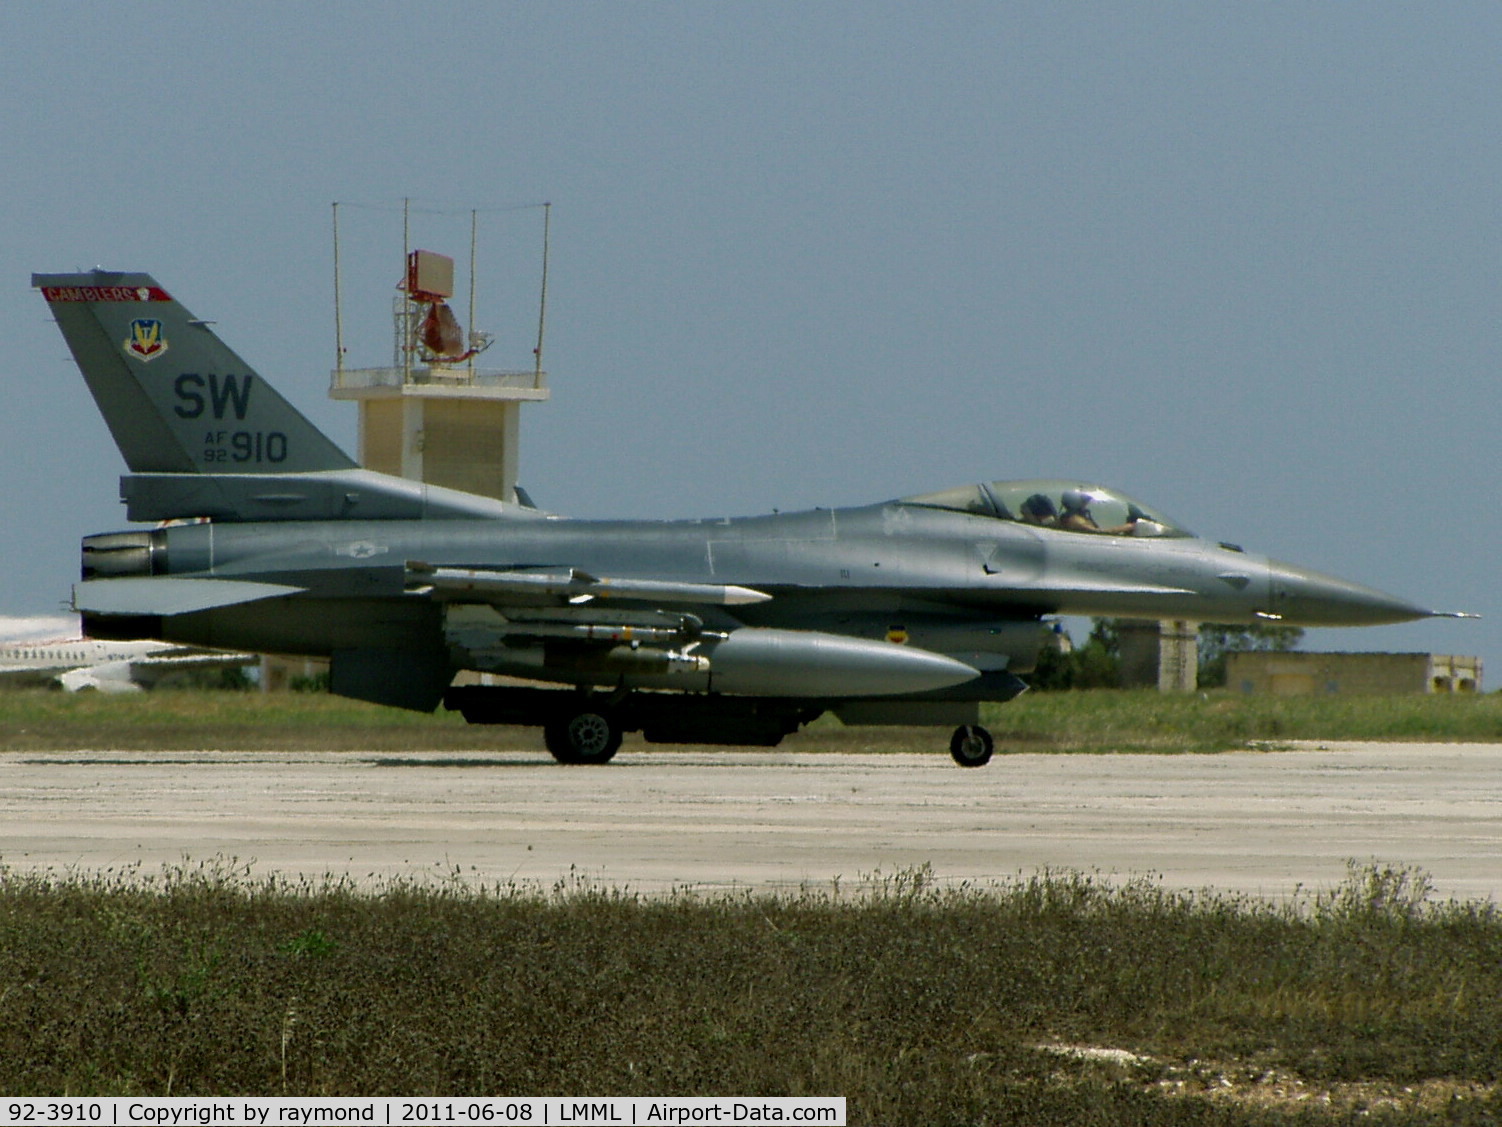 92-3910, 1992 General Dynamics F-16CM Fighting Falcon C/N CC-152, F16 92-3910 USAF diverted to Malta during the Libyan conflict. The aircraft departed shortly afterwards to continue with its mission over Libya.